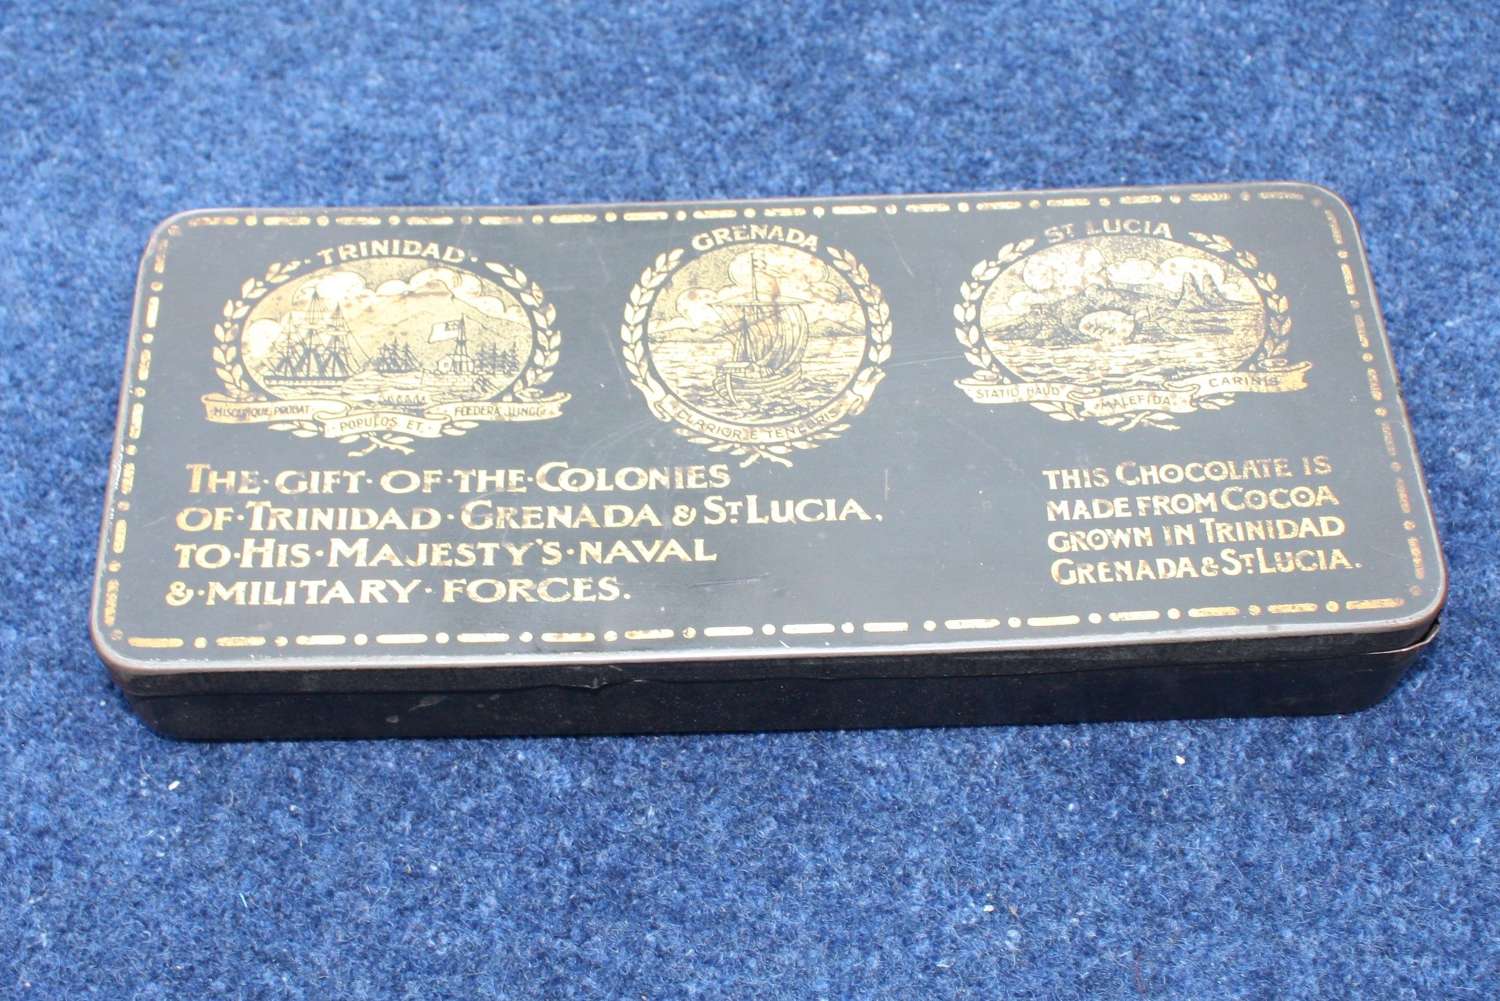 WW1 Chocolate tin: Gift from Colonies of Trinidad, Grenada & St Lucia